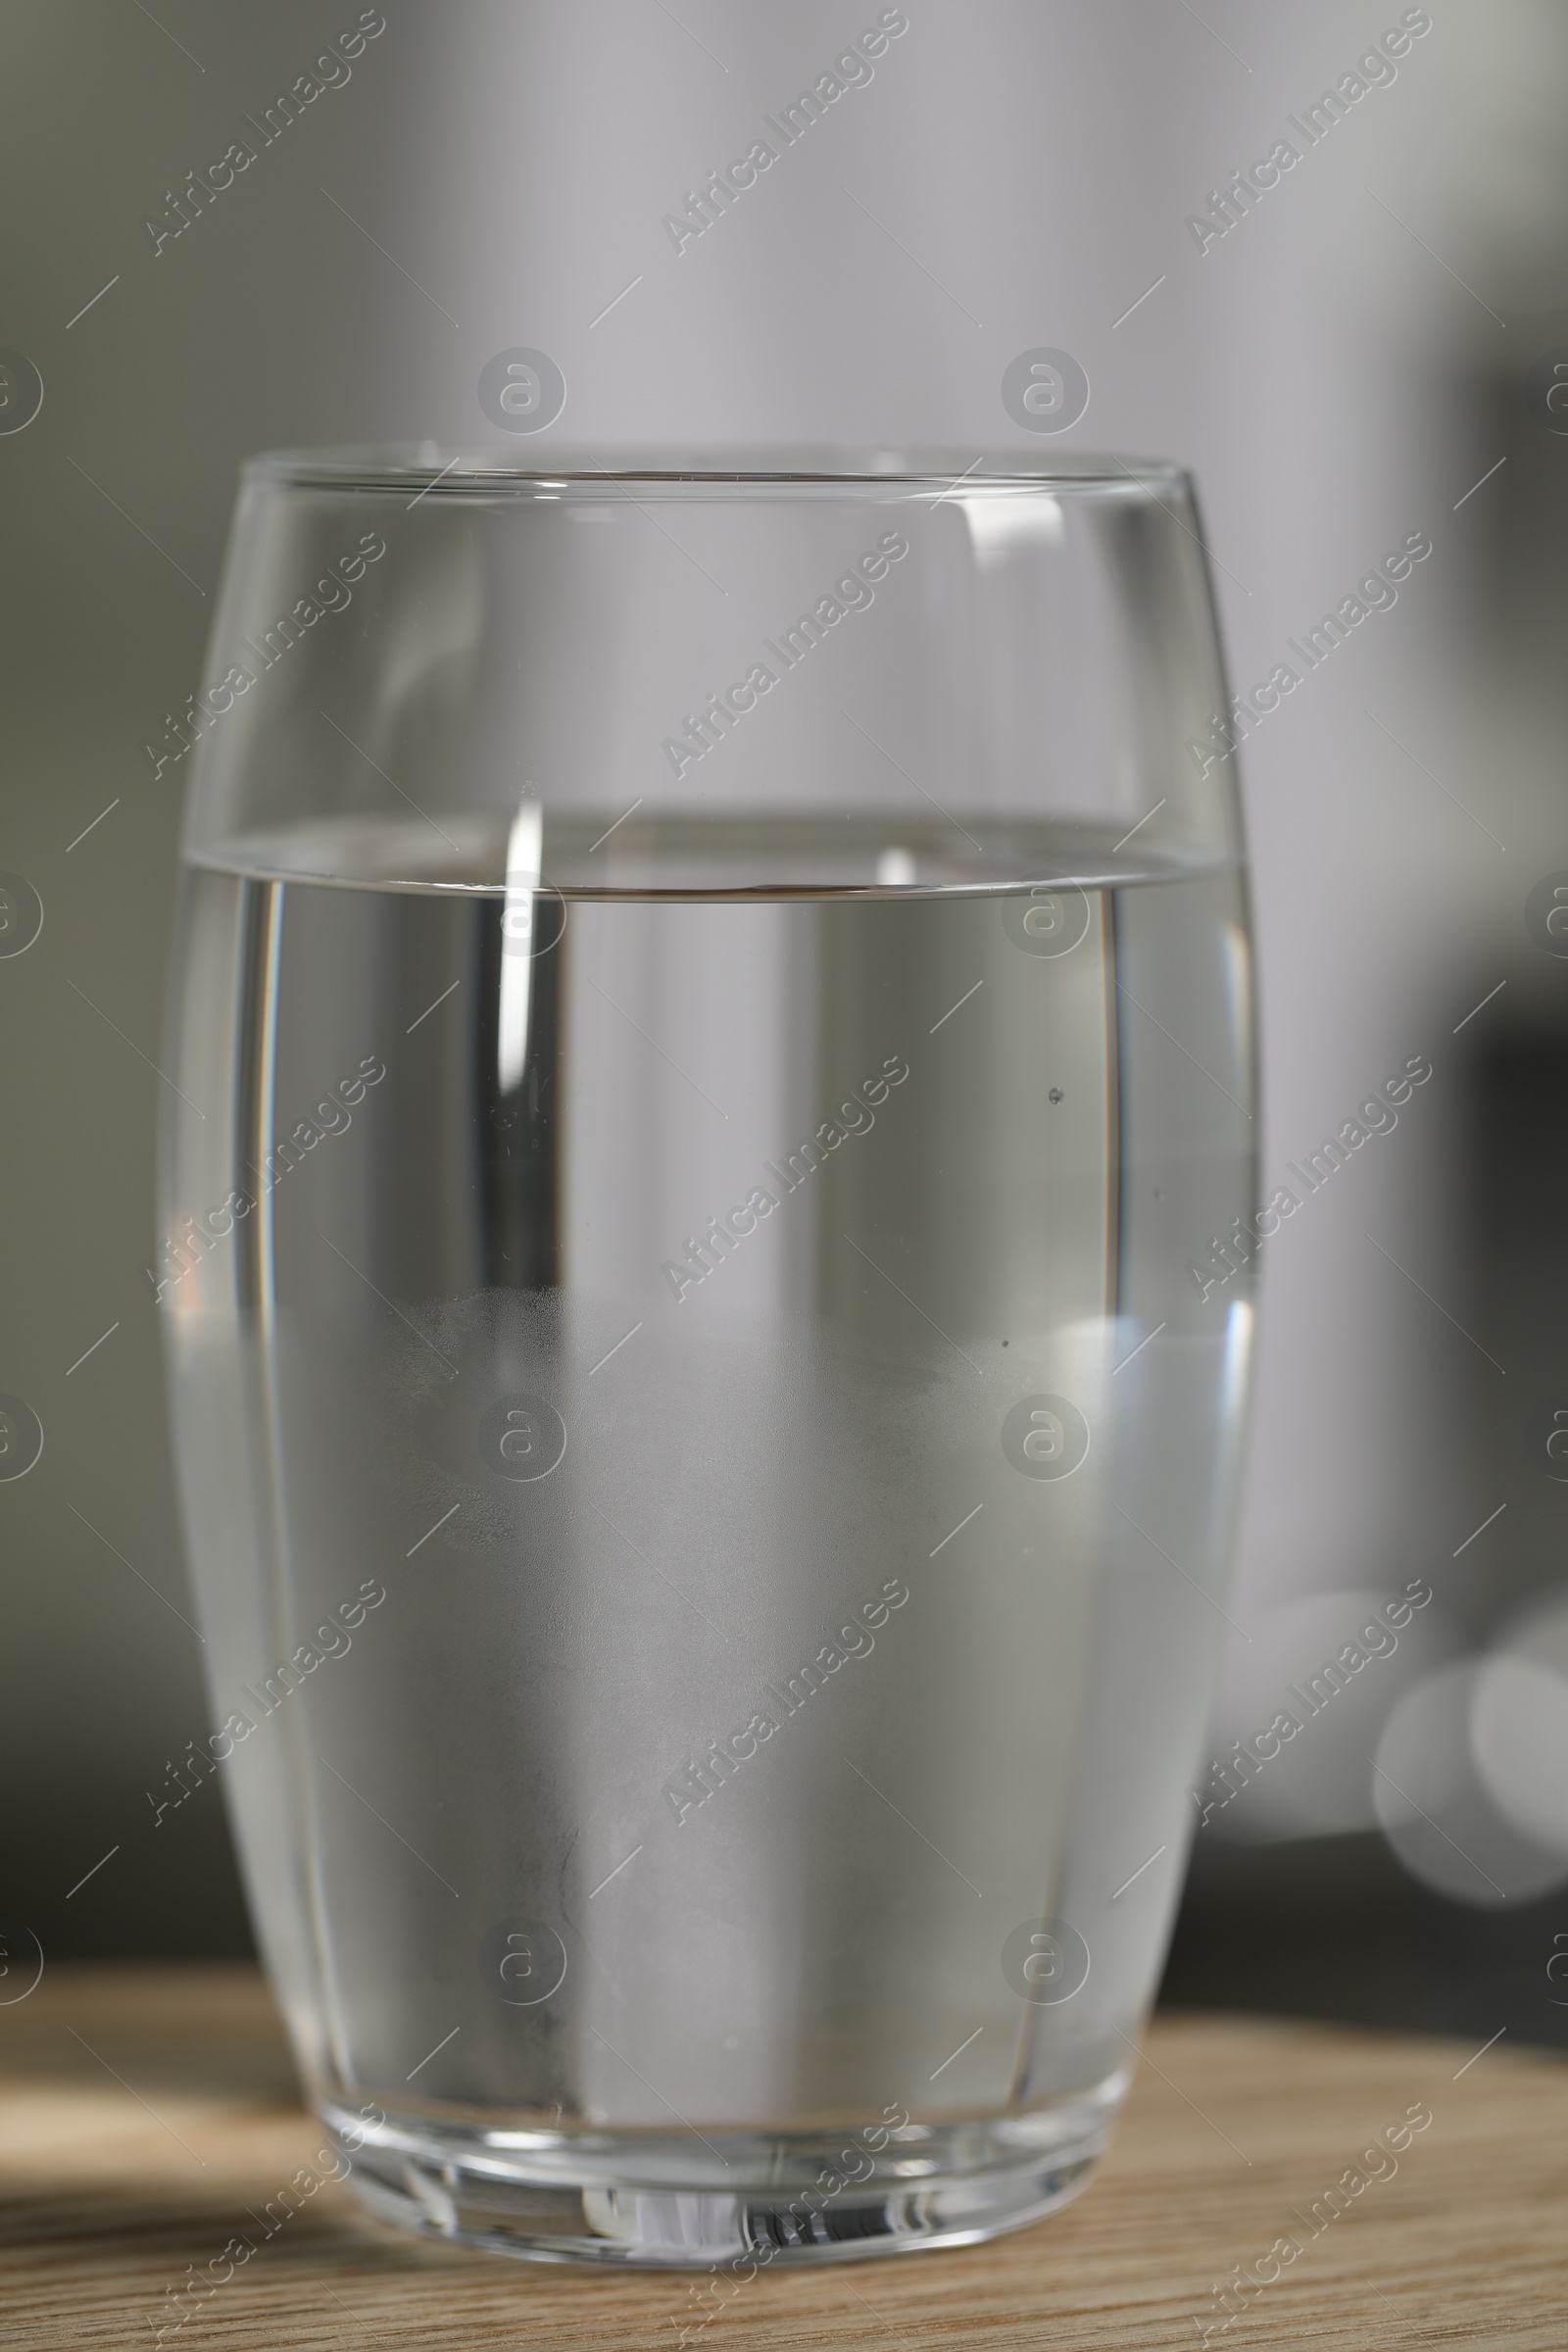 Photo of Glass of pure water on wooden table against blurred background, closeup